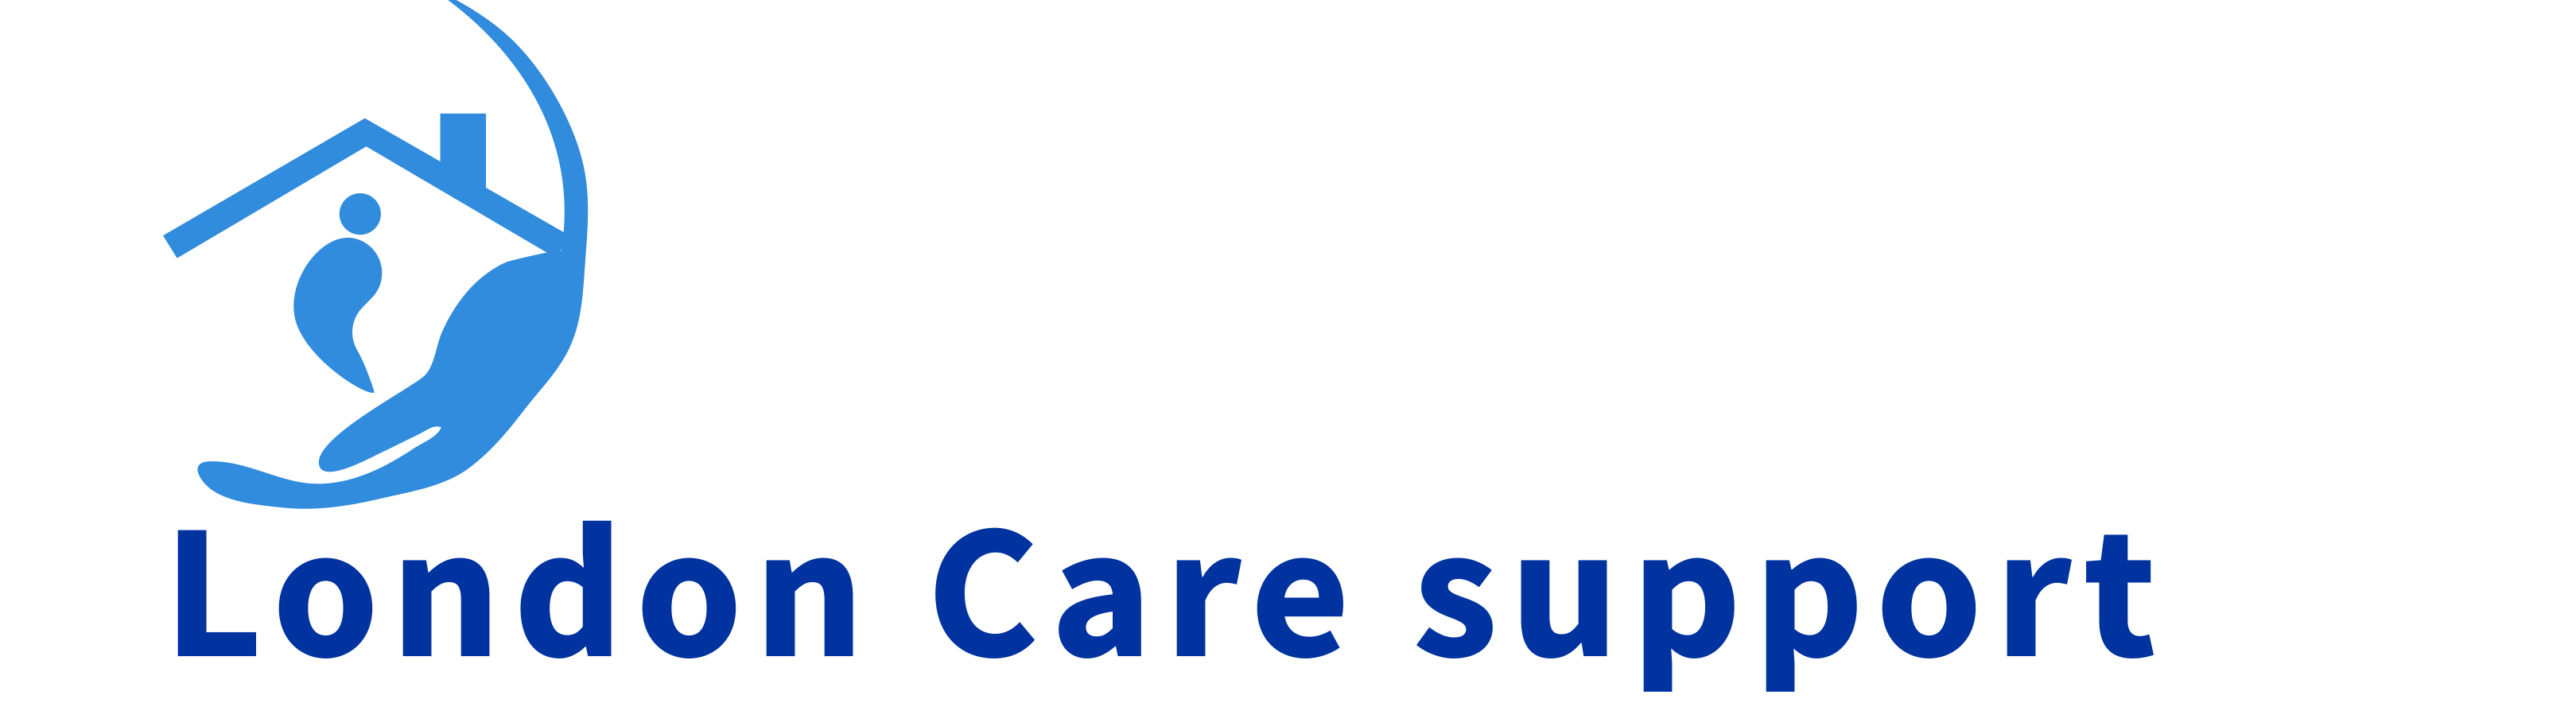 London Care Support